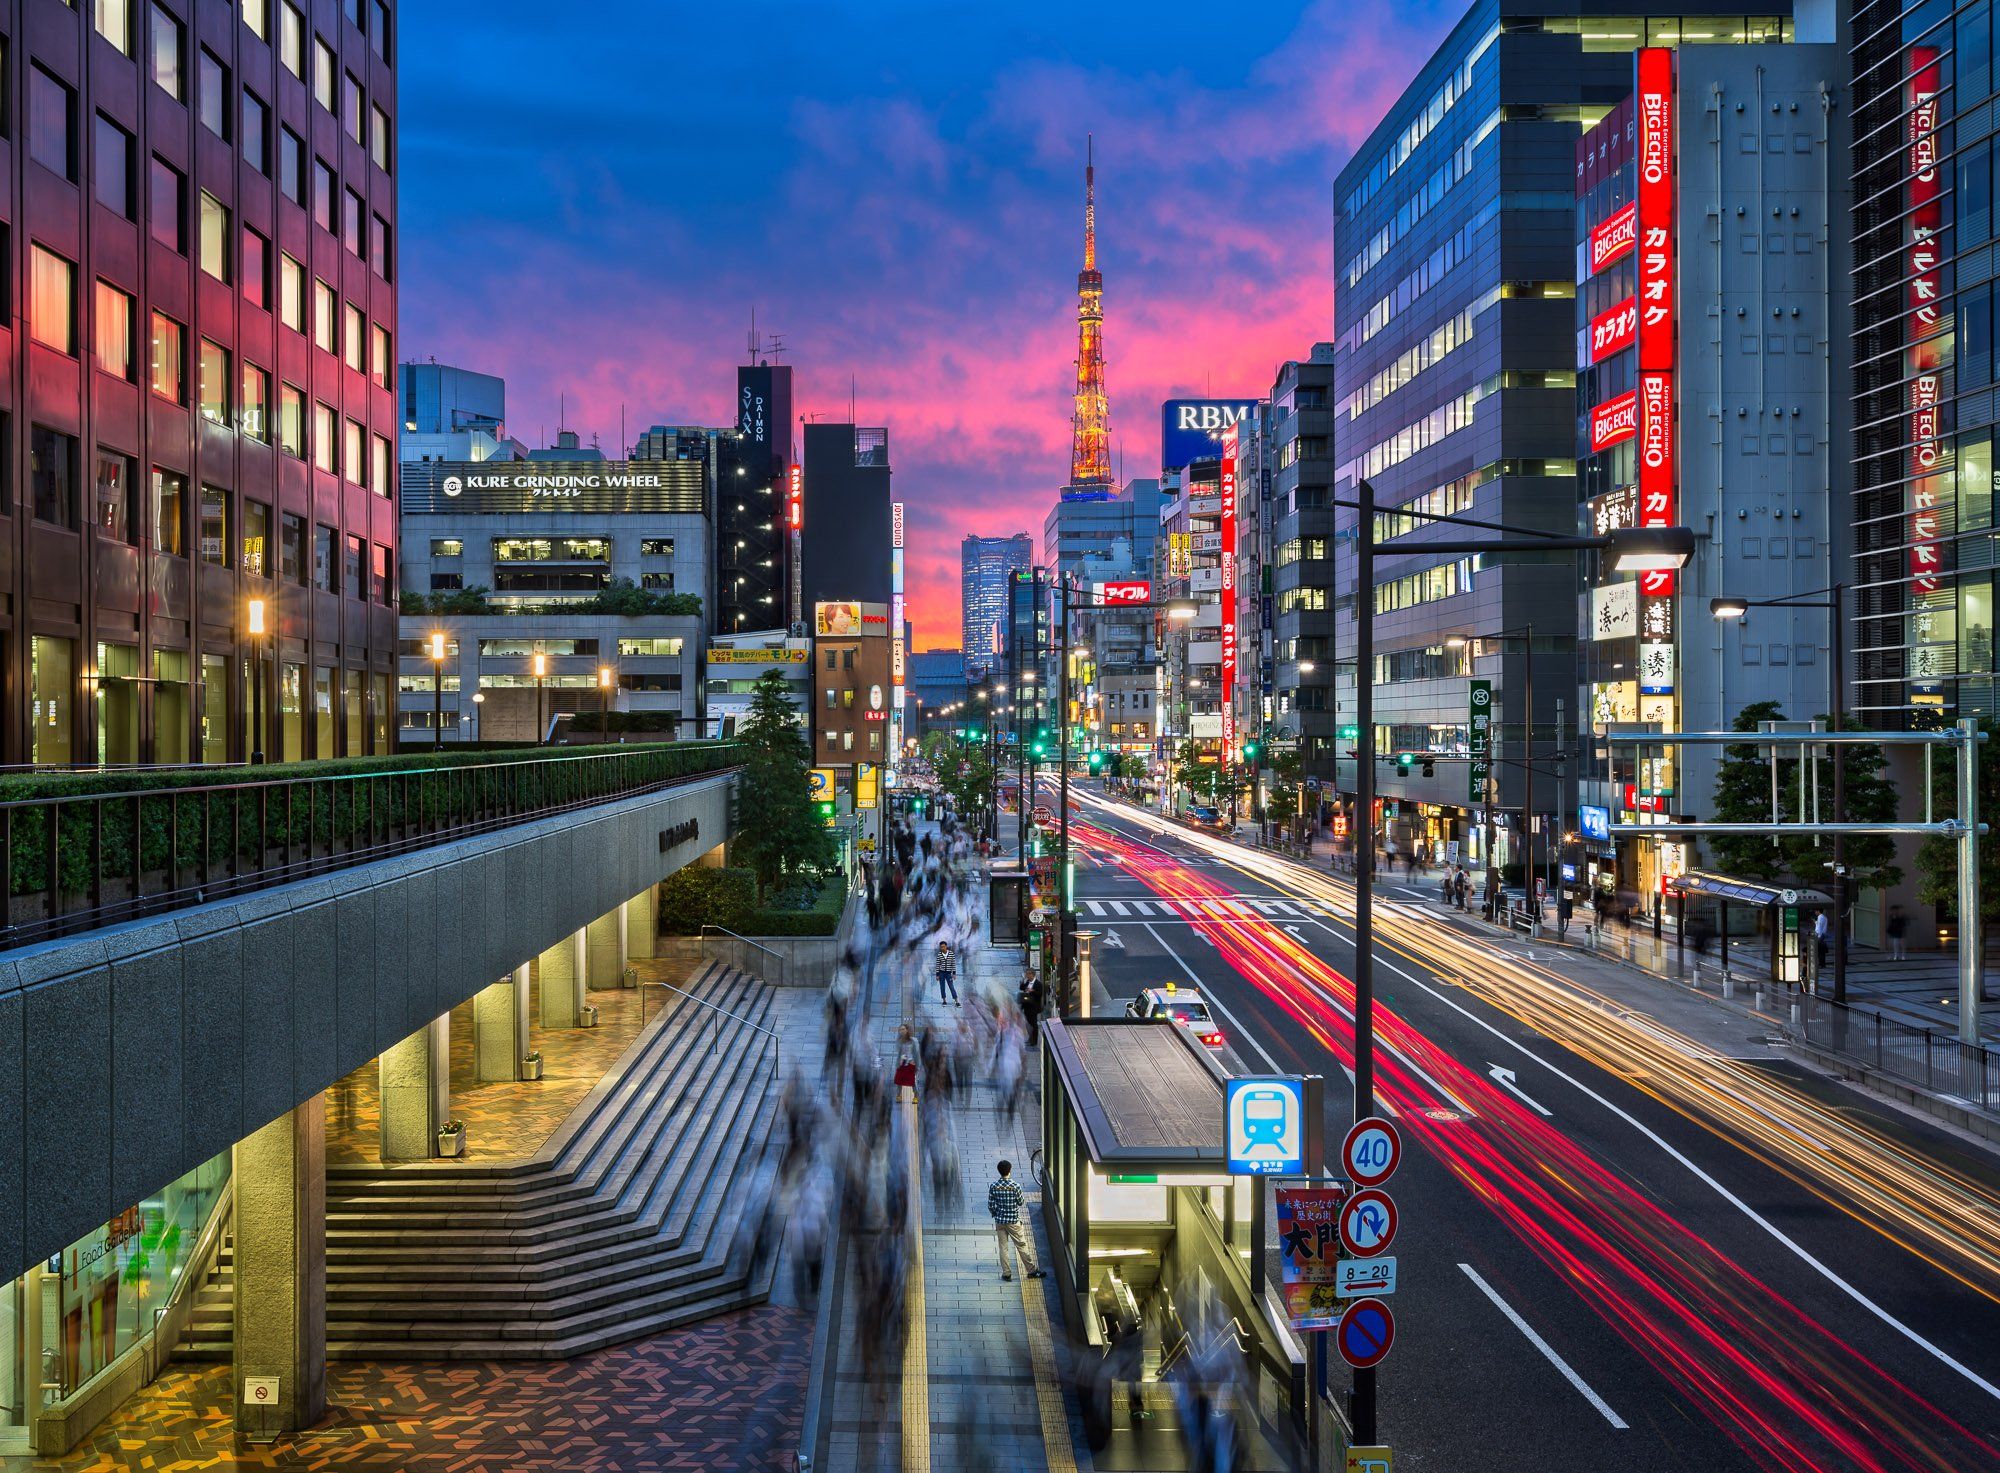 architecture, asia, asian, avenue, blue, building, business, busy, capital, cars, city, cityscape, crowdy, diamon, district, downtown, dusk, east, eastern, electric, evening, iconic, illuminated, japan, japanese, landmark, landscape, lights, modern, motio, Andrey Omelyanchuk